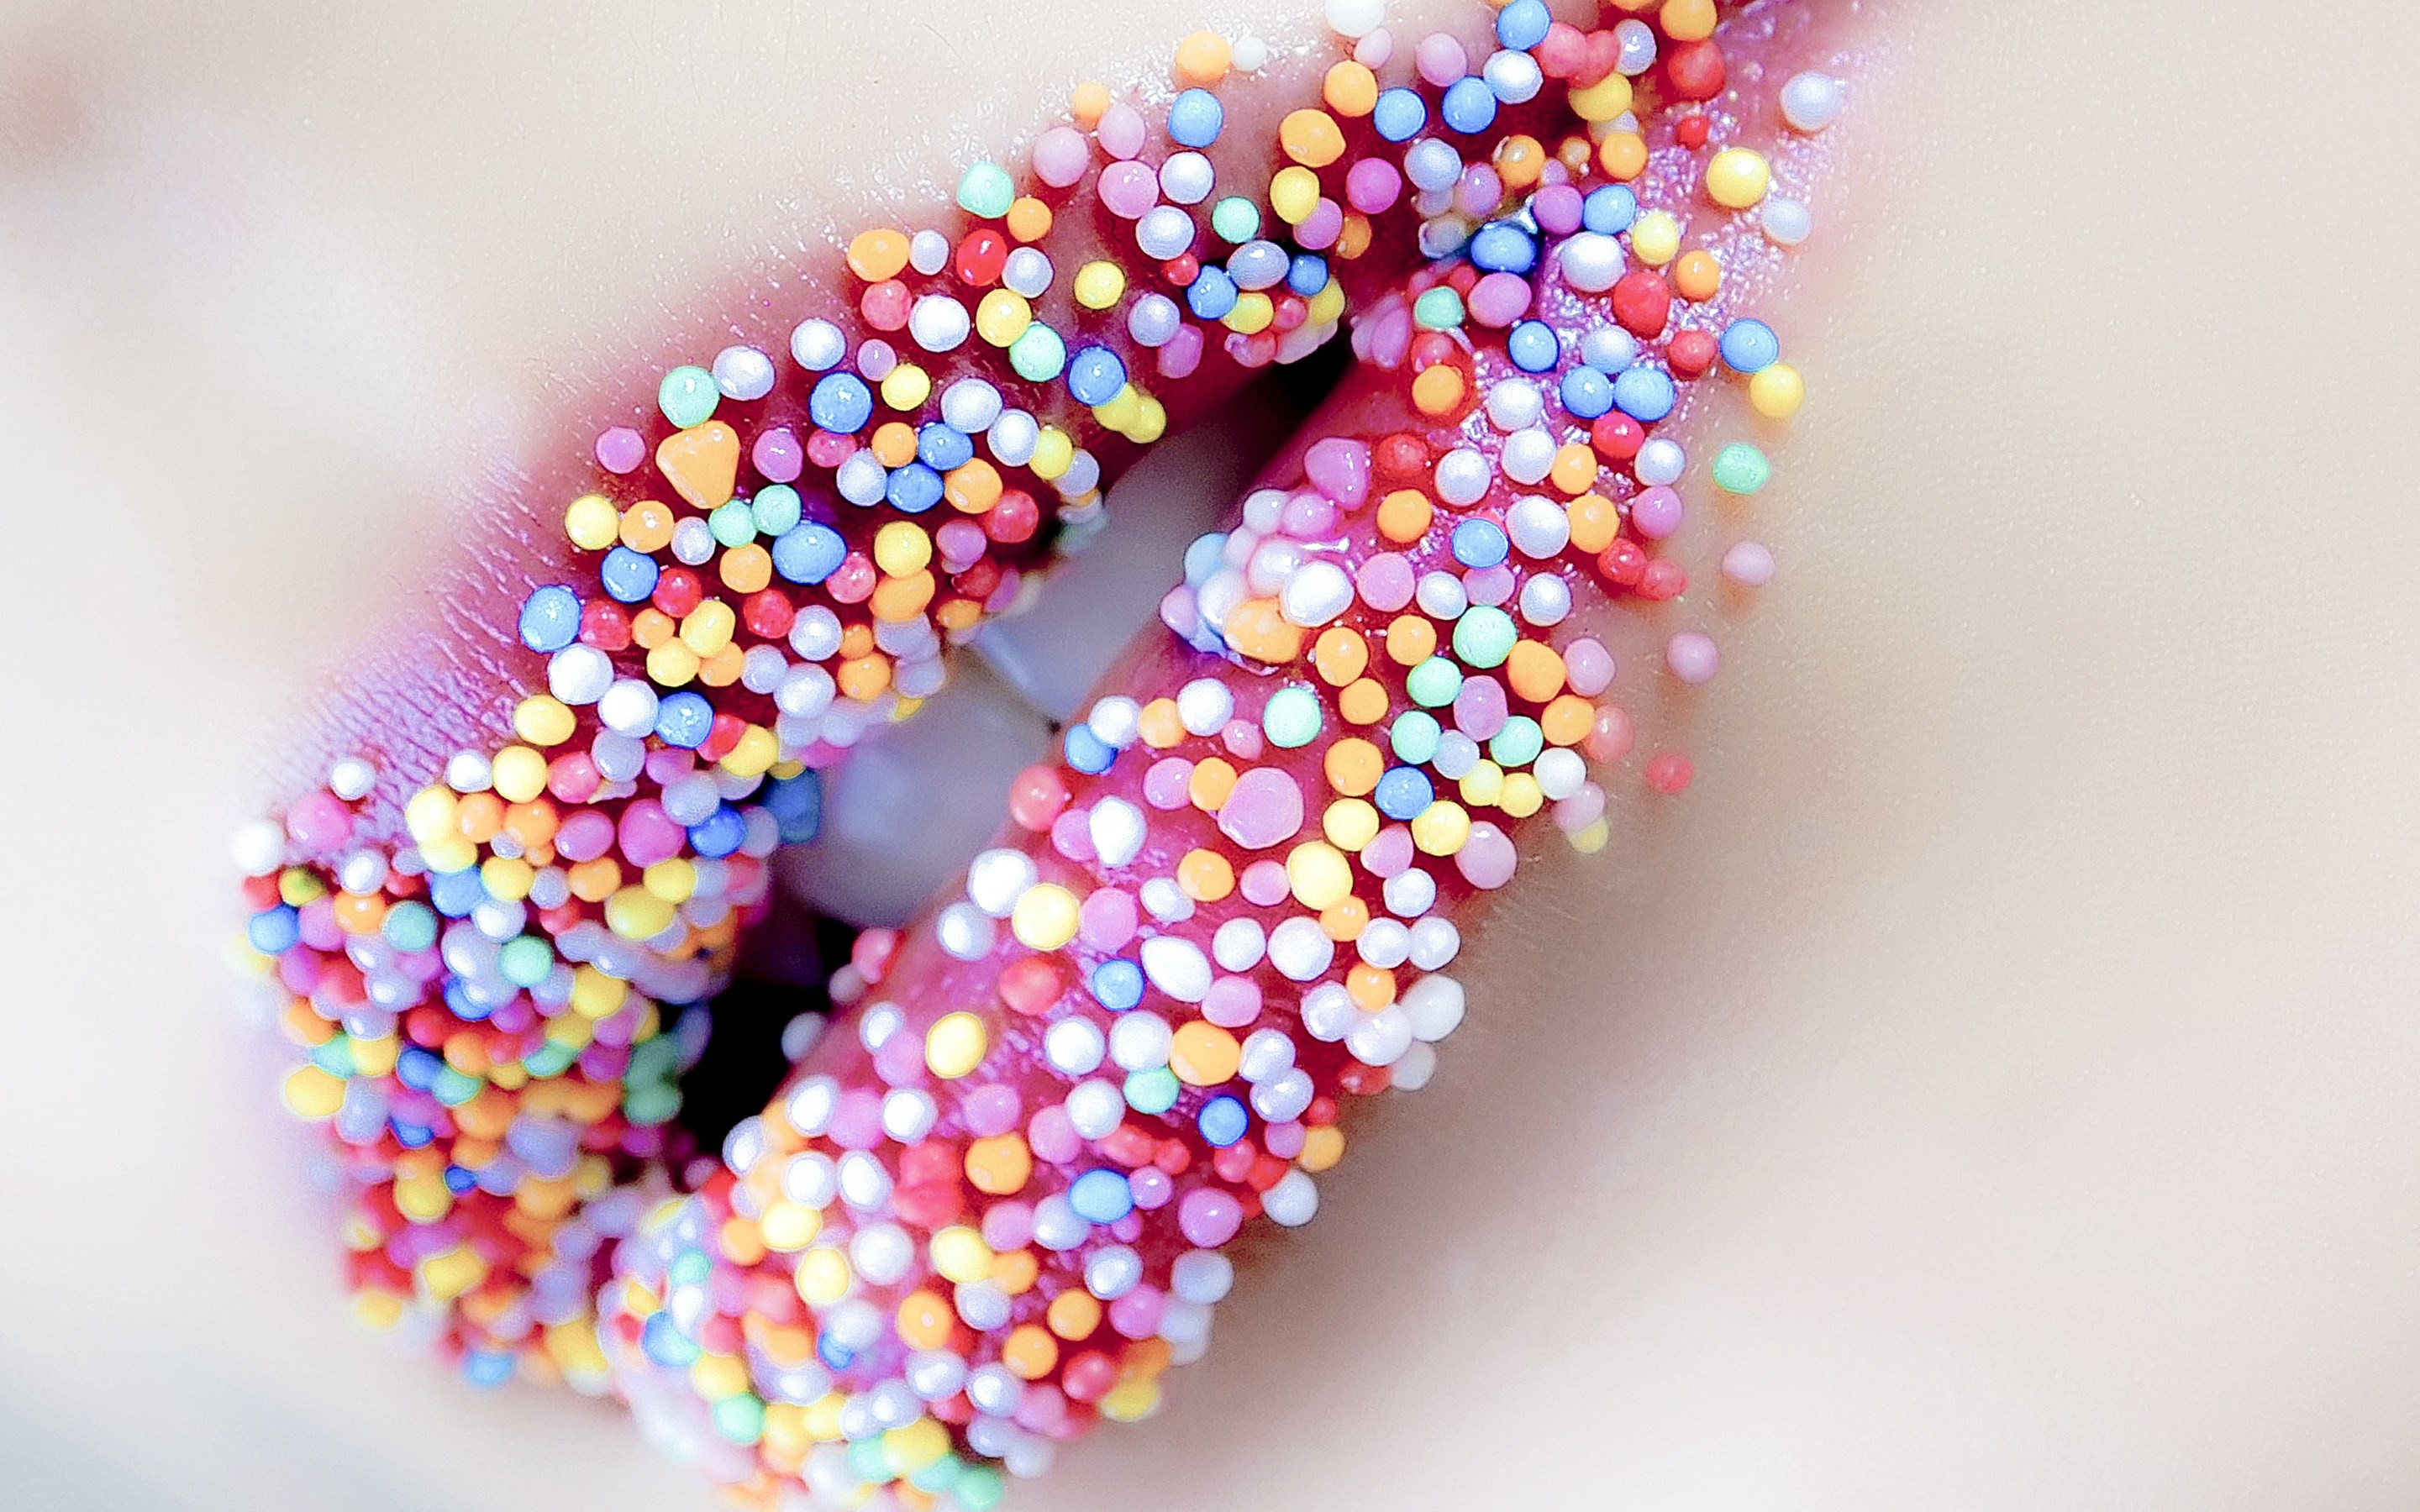 Lips with sweets wallpaper 2880x1800